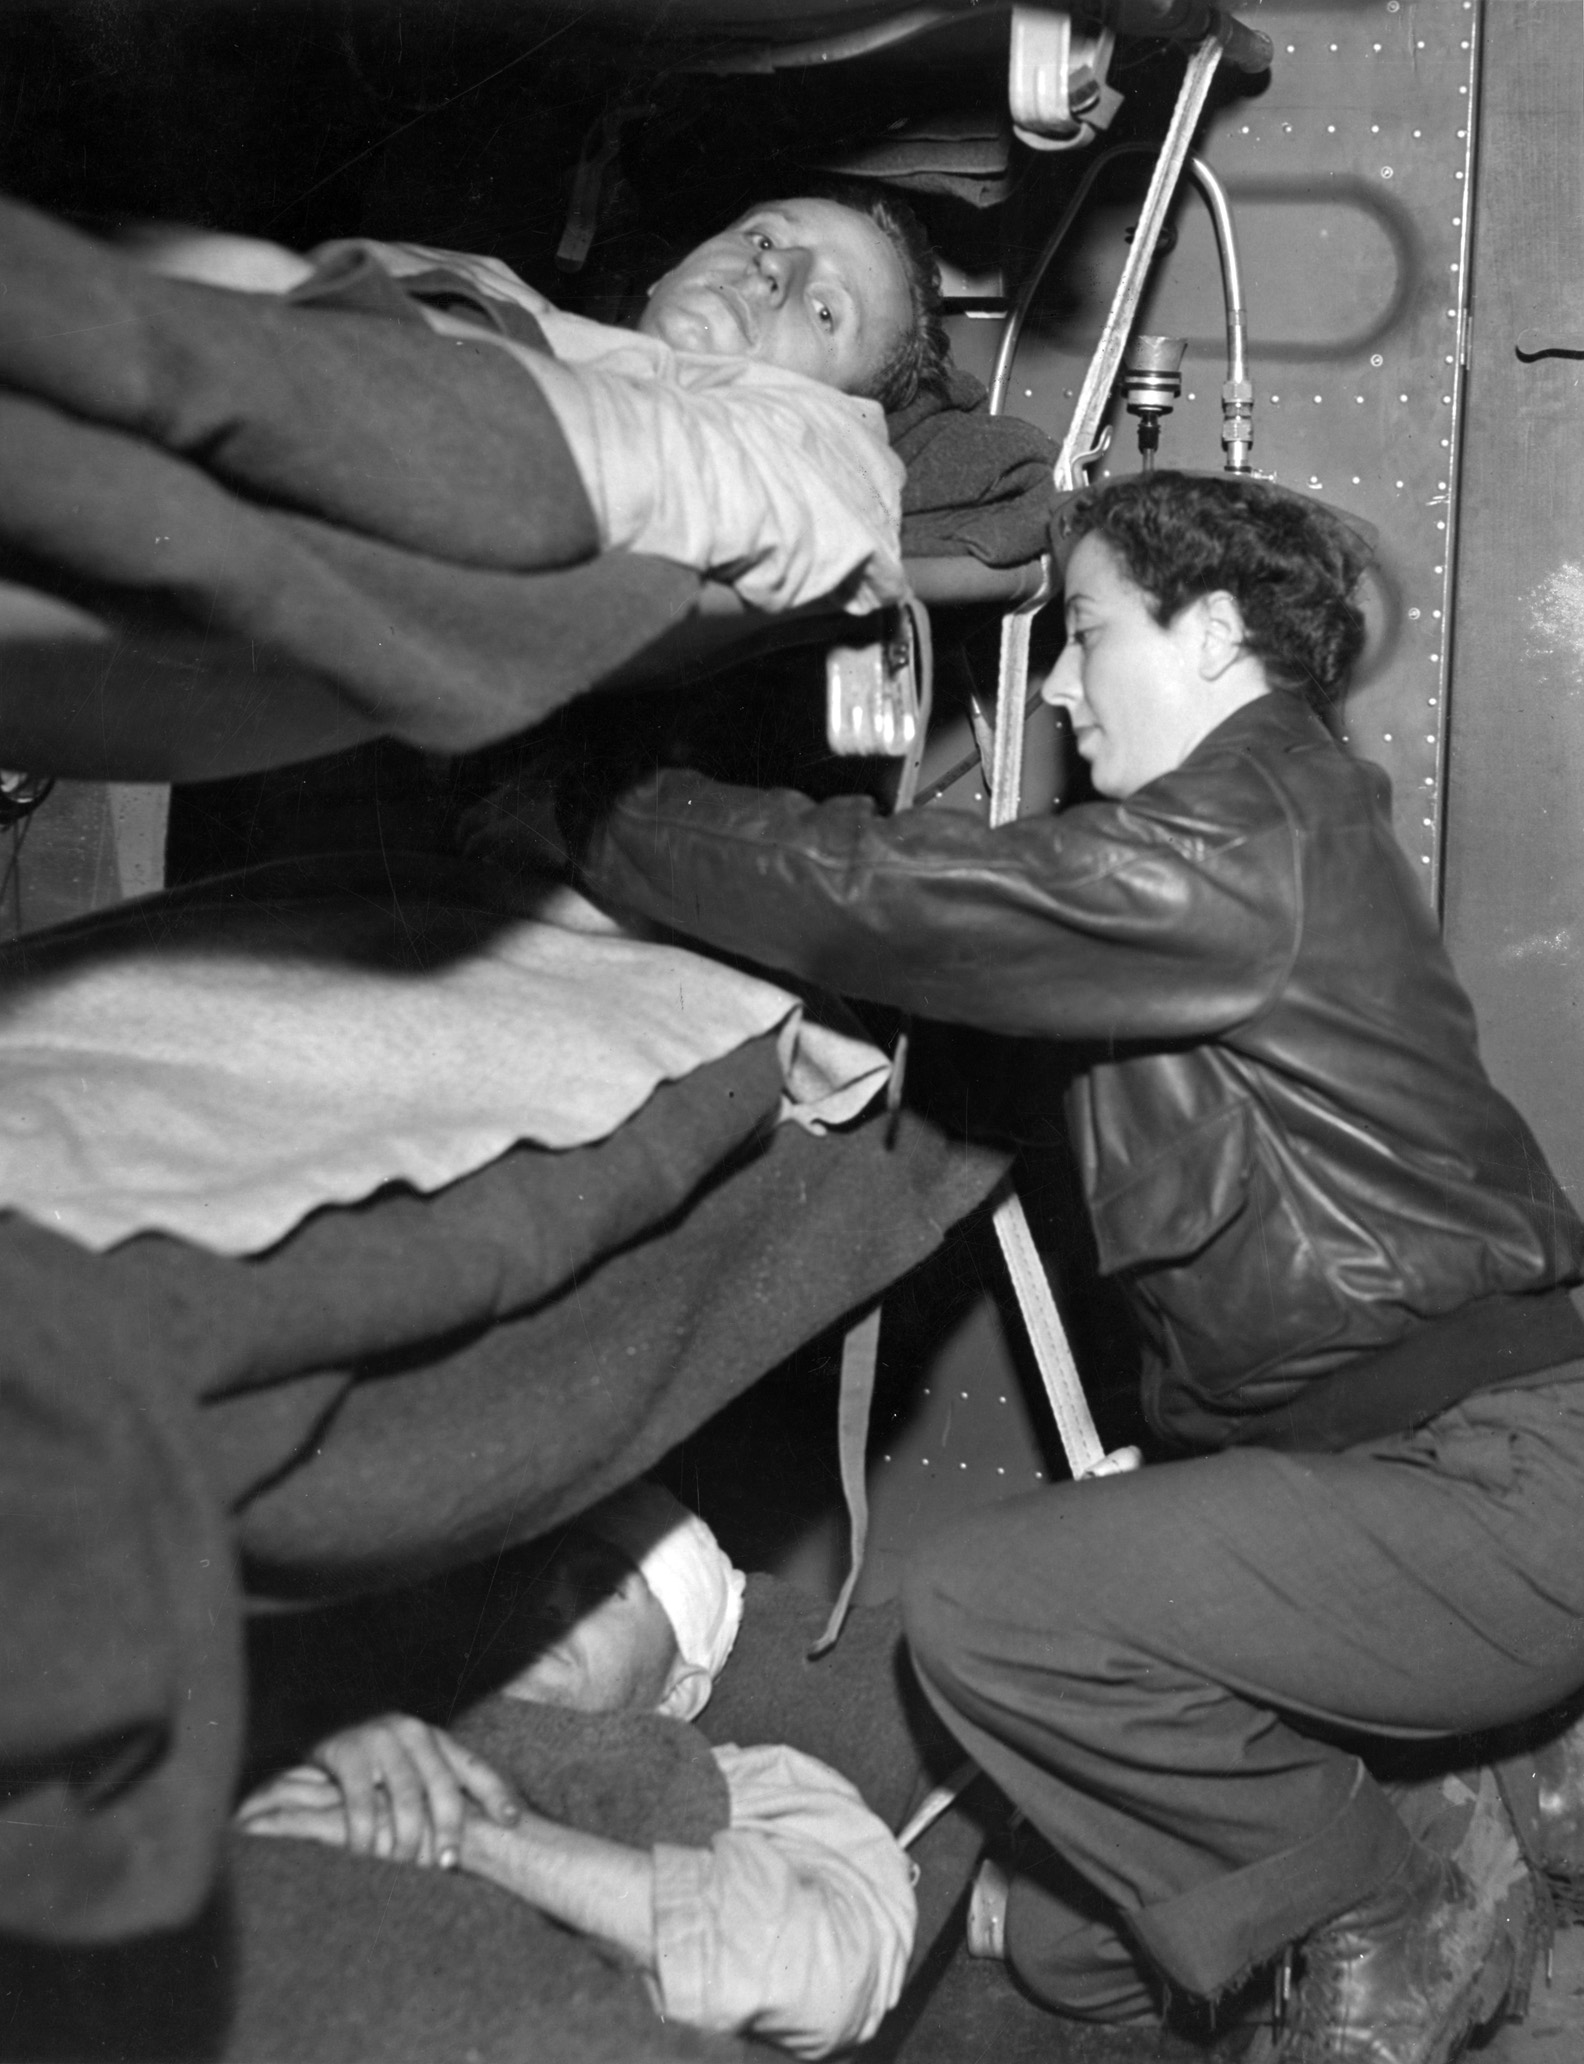 Army nurse 2nd Lieutenant Katherine Friedrich attends to a wounded patient aboard a Douglas C-47 transport aircraft bound for Britain.  The evacuation plane had taken off from Toul, France, where Allied soldiers who were wounded in combat or ill were prepared for the flight.